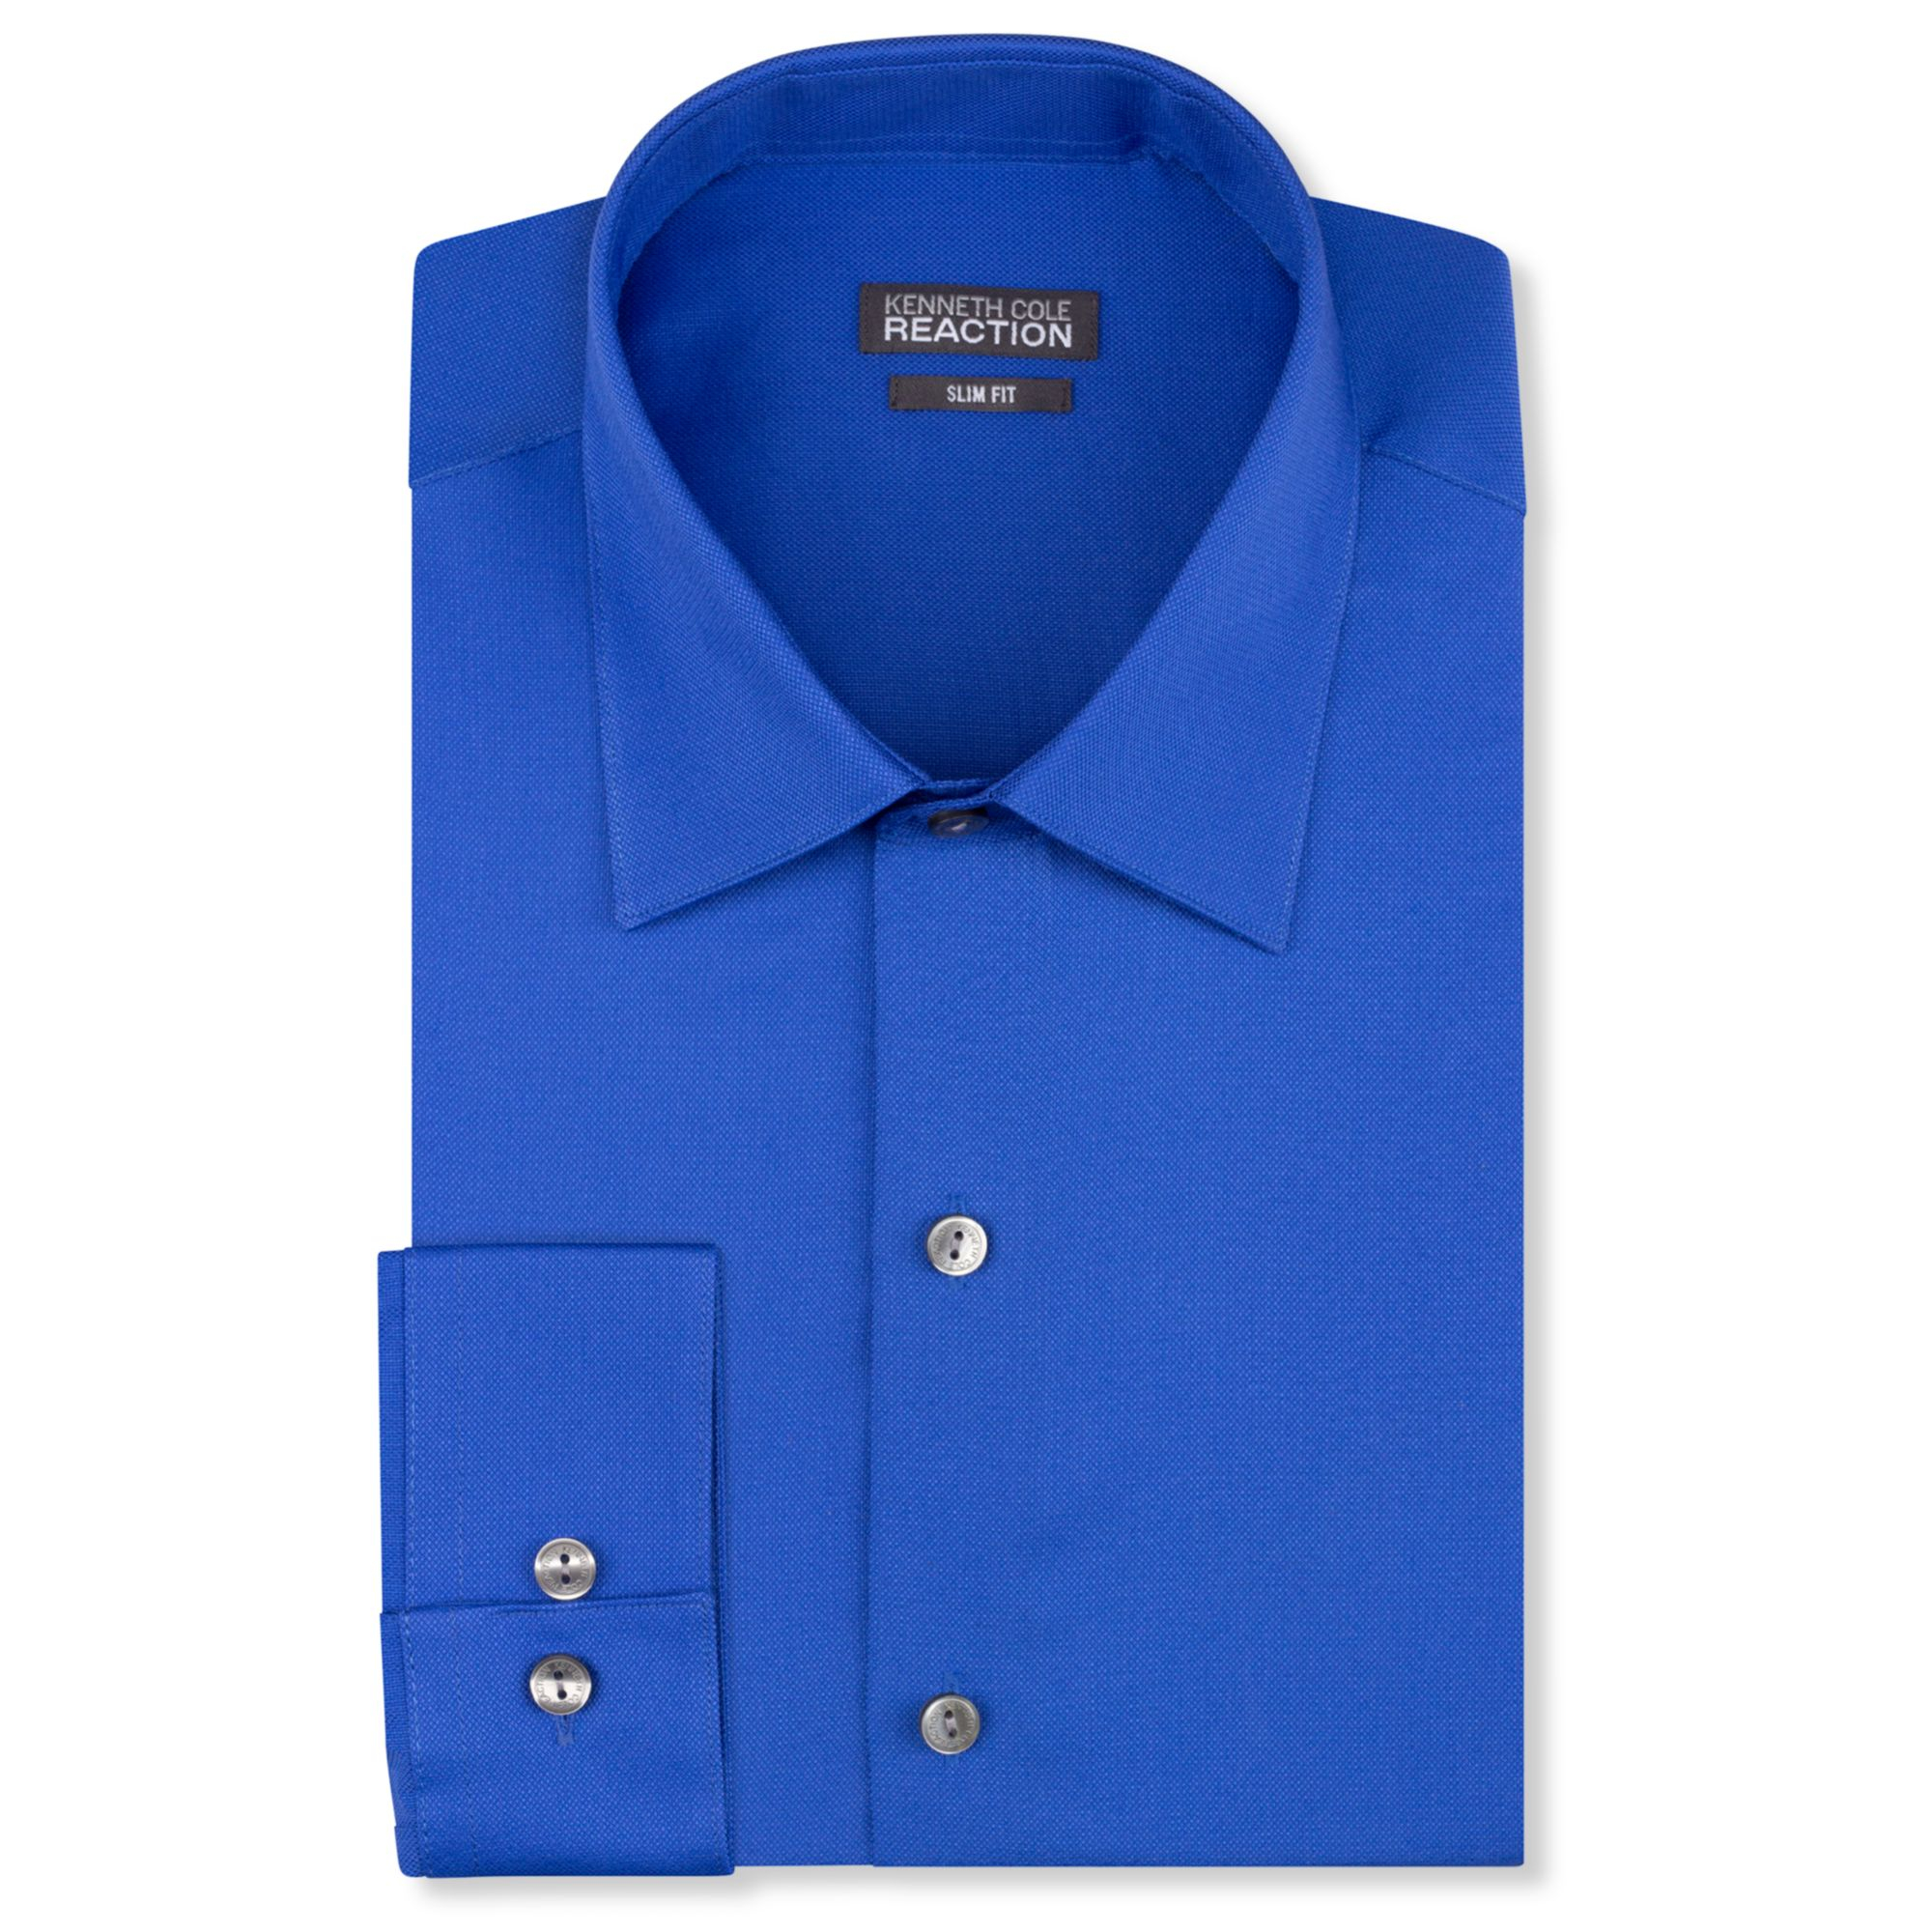 Lyst - Kenneth Cole Reaction Slimfit Royal Blue Solid Dress Shirt in ...